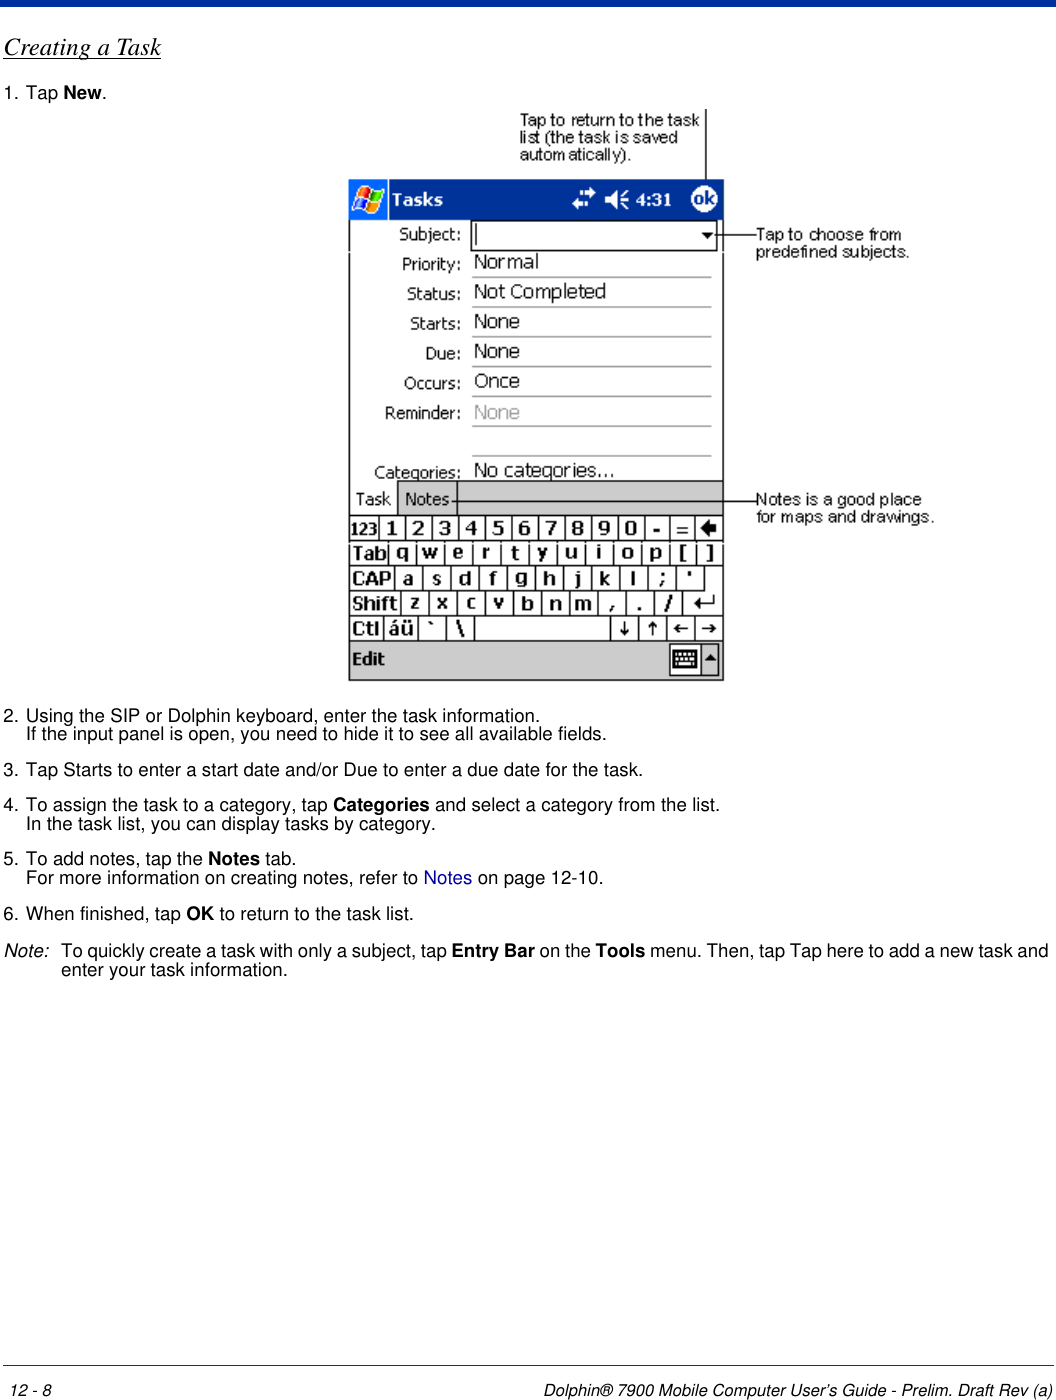 12 - 8 Dolphin® 7900 Mobile Computer User’s Guide - Prelim. Draft Rev (a)Creating a Task1. Tap New.2. Using the SIP or Dolphin keyboard, enter the task information. If the input panel is open, you need to hide it to see all available fields.3. Tap Starts to enter a start date and/or Due to enter a due date for the task. 4. To assign the task to a category, tap Categories and select a category from the list.  In the task list, you can display tasks by category.5. To add notes, tap the Notes tab.  For more information on creating notes, refer to Notes on page 12-10.6. When finished, tap OK to return to the task list.Note: To quickly create a task with only a subject, tap Entry Bar on the Tools menu. Then, tap Tap here to add a new task and enter your task information.